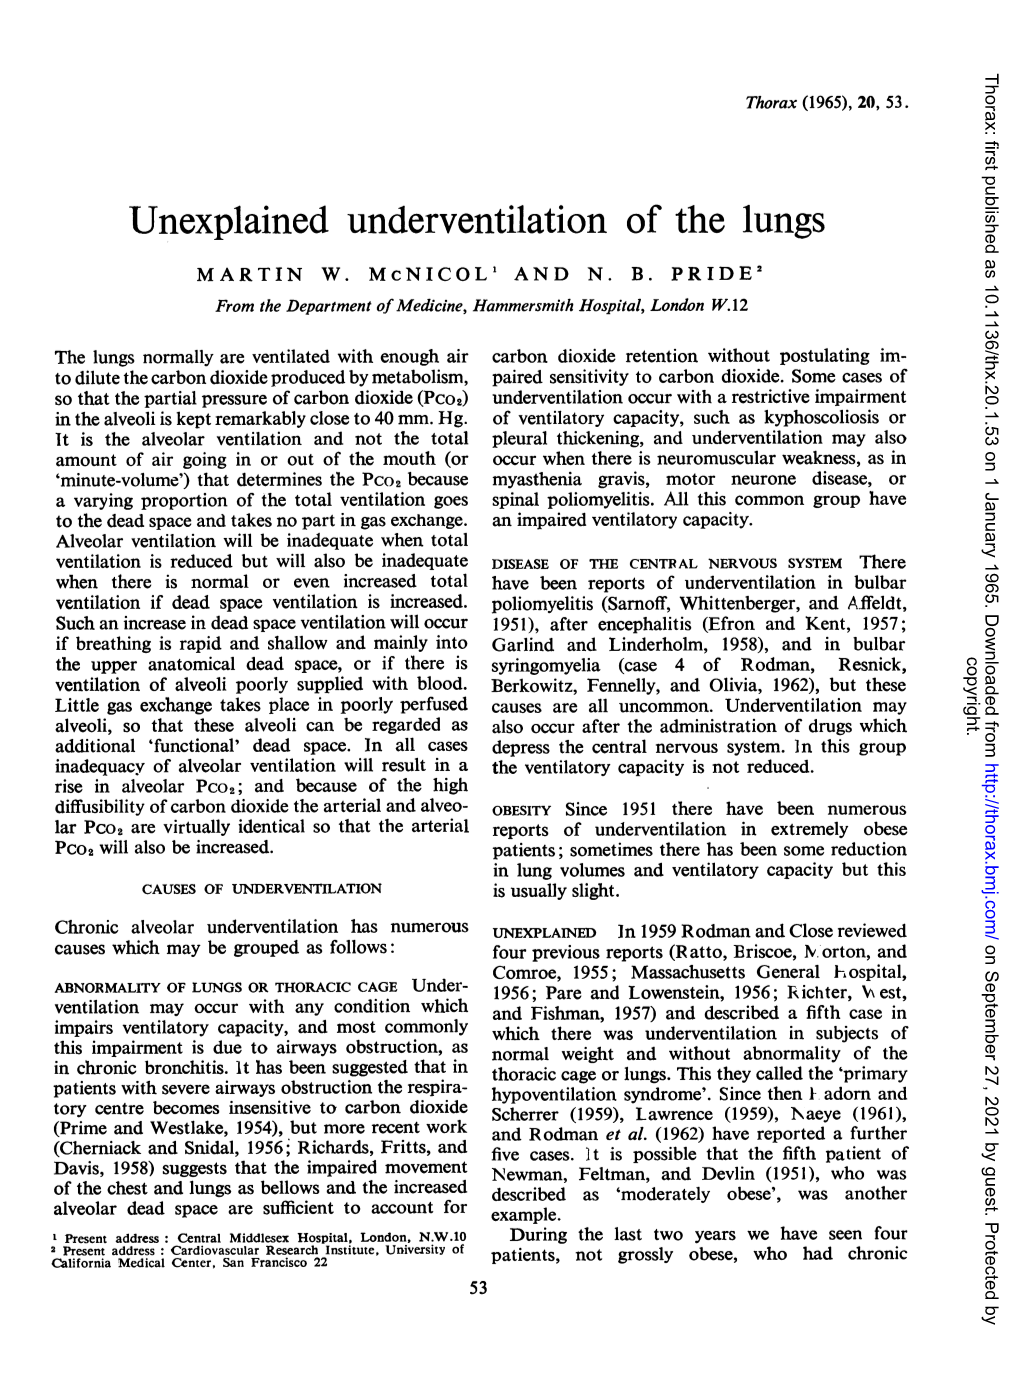 Unexplained Underventilation of the Lungs